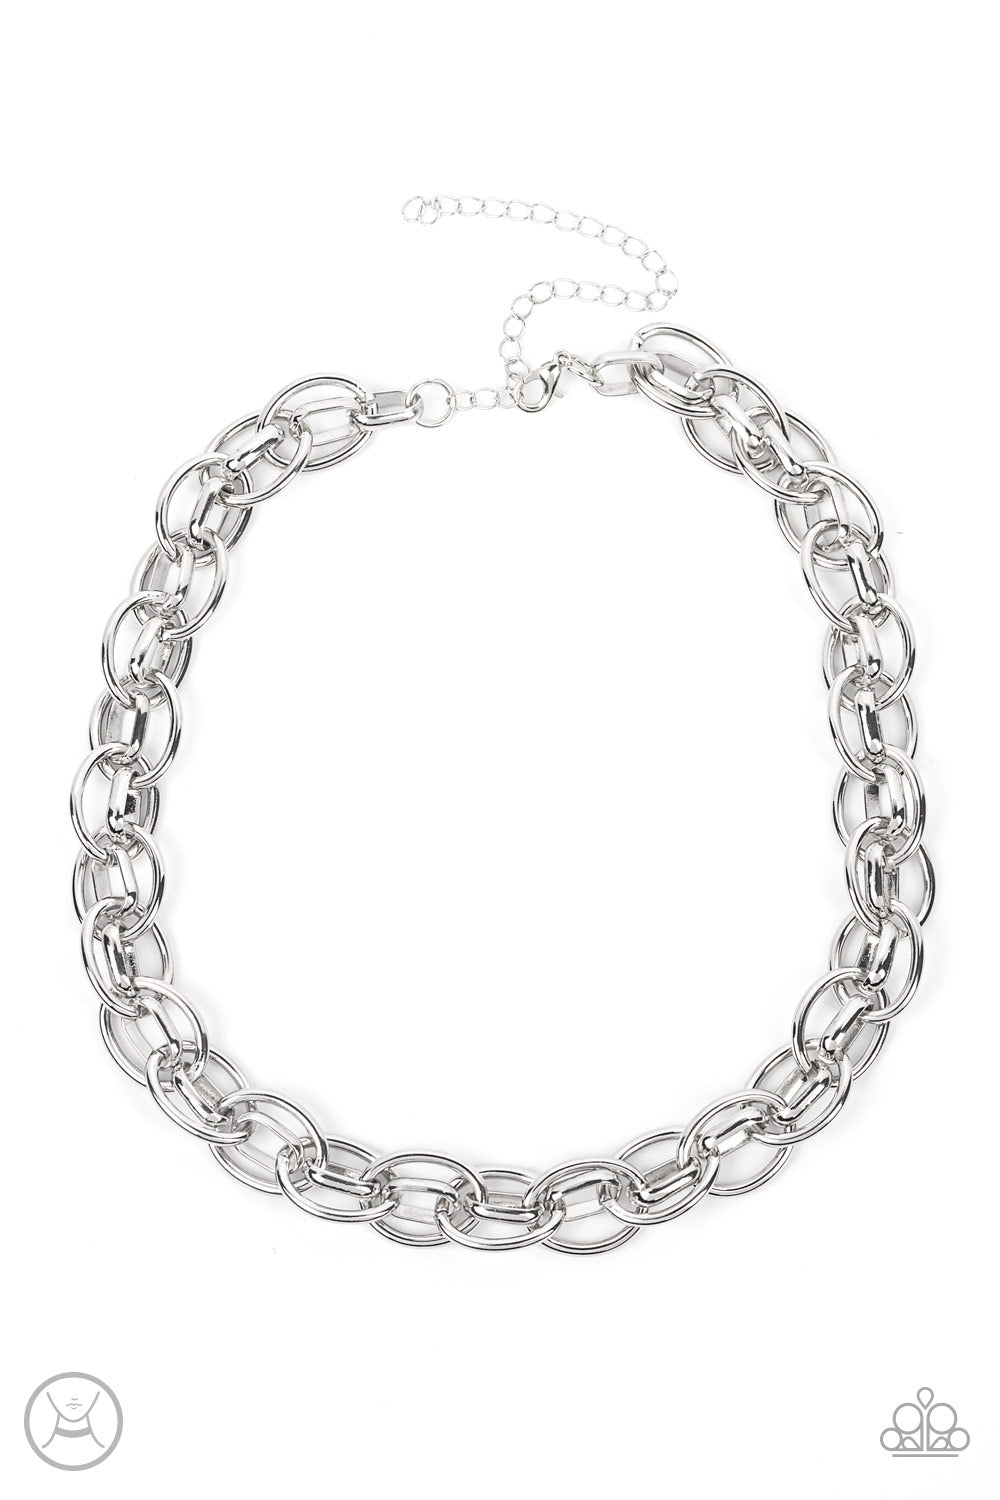 oversized silver chain interlocks with an oval linked chain